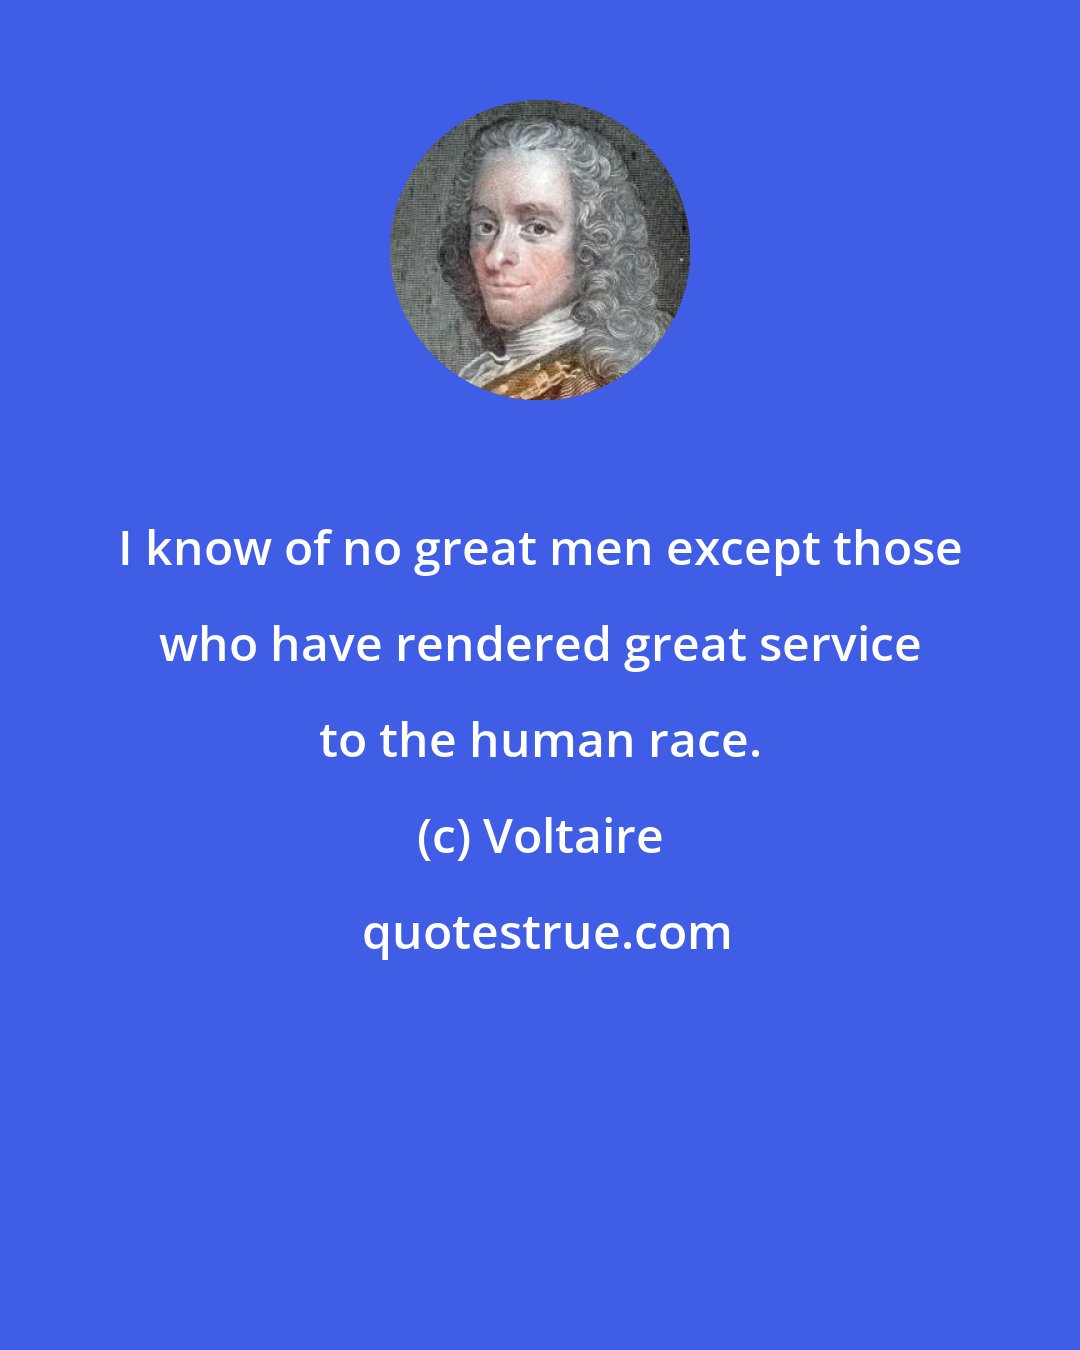 Voltaire: I know of no great men except those who have rendered great service to the human race.